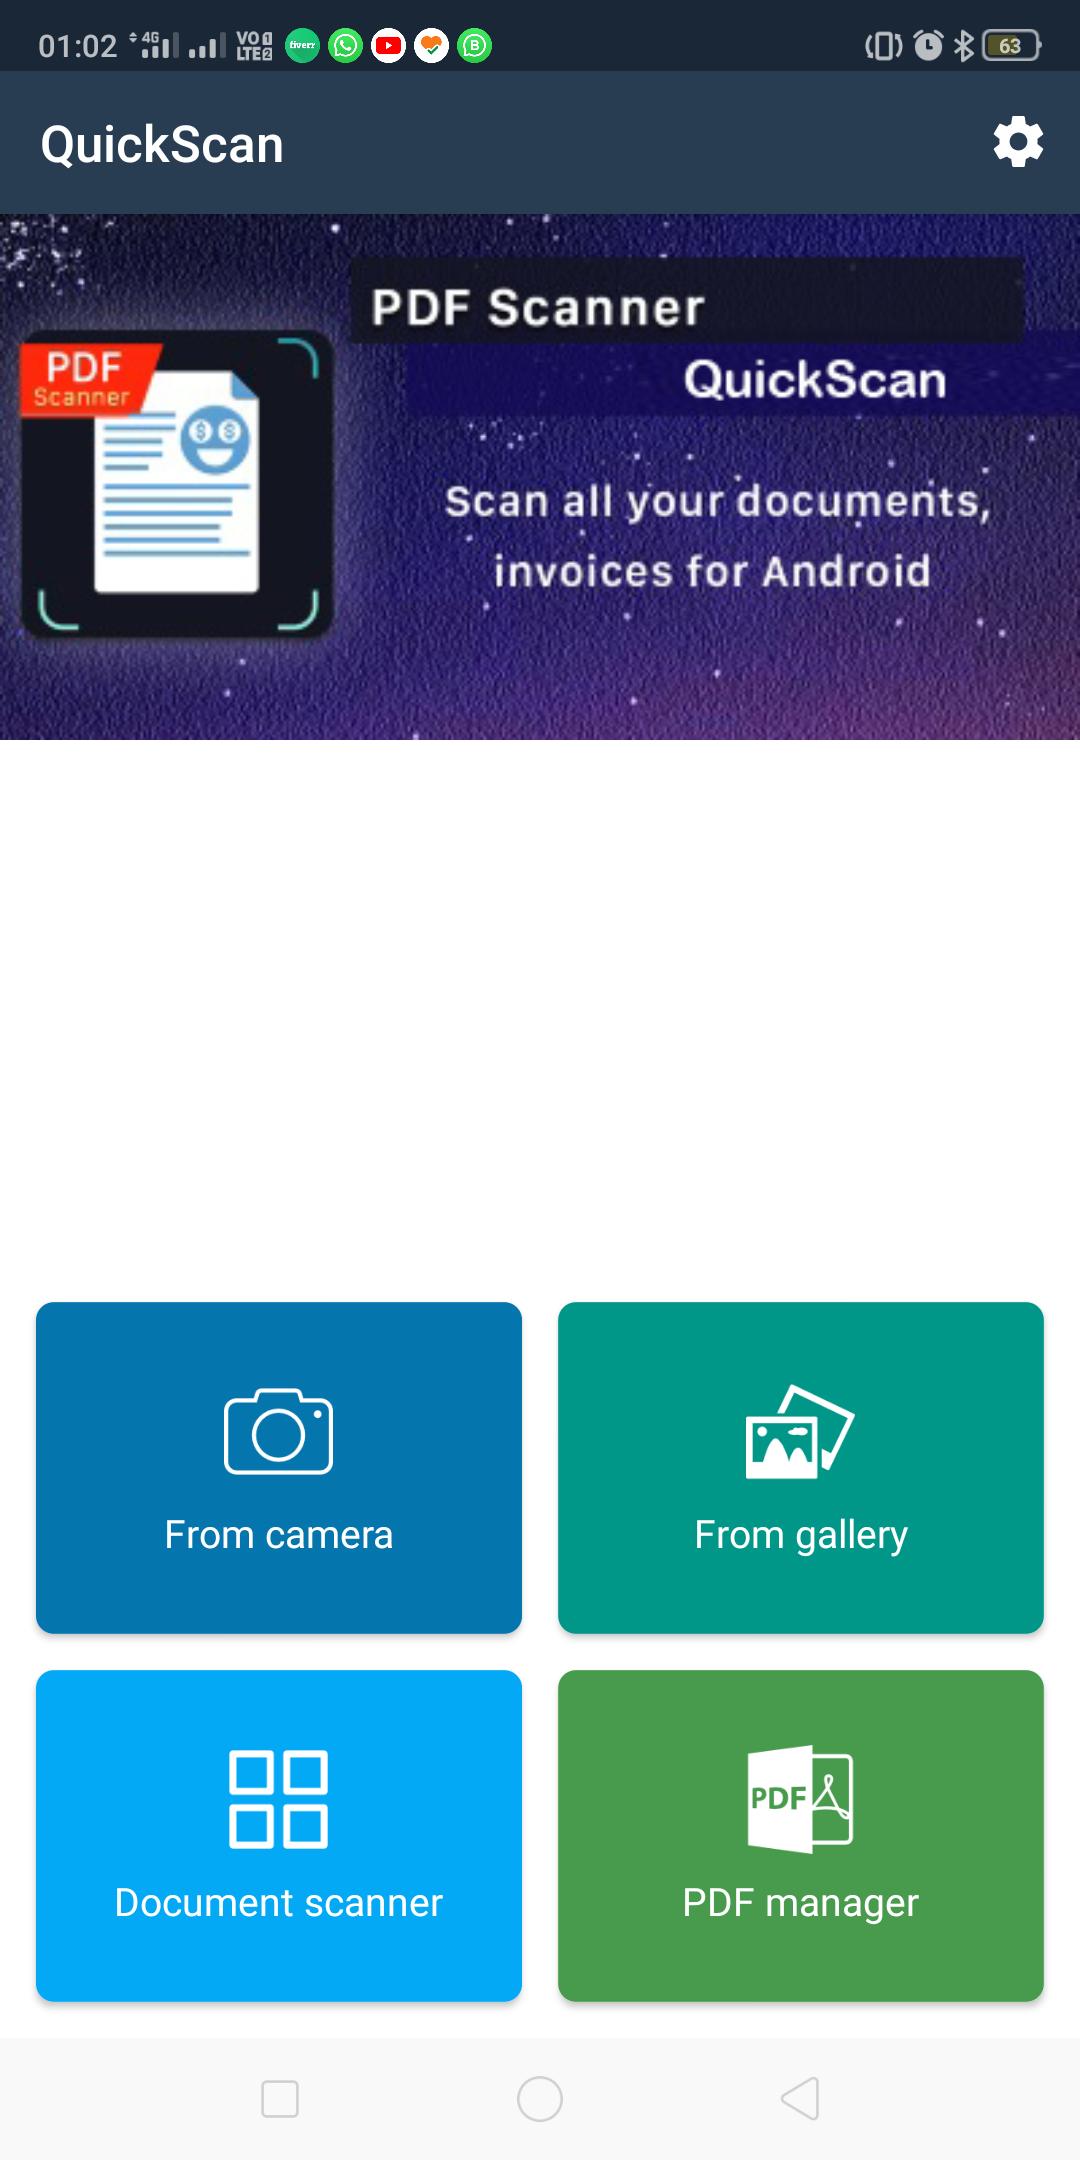 Quick Scan - Free Document Scanner & PDF Scan for Android - APK Download